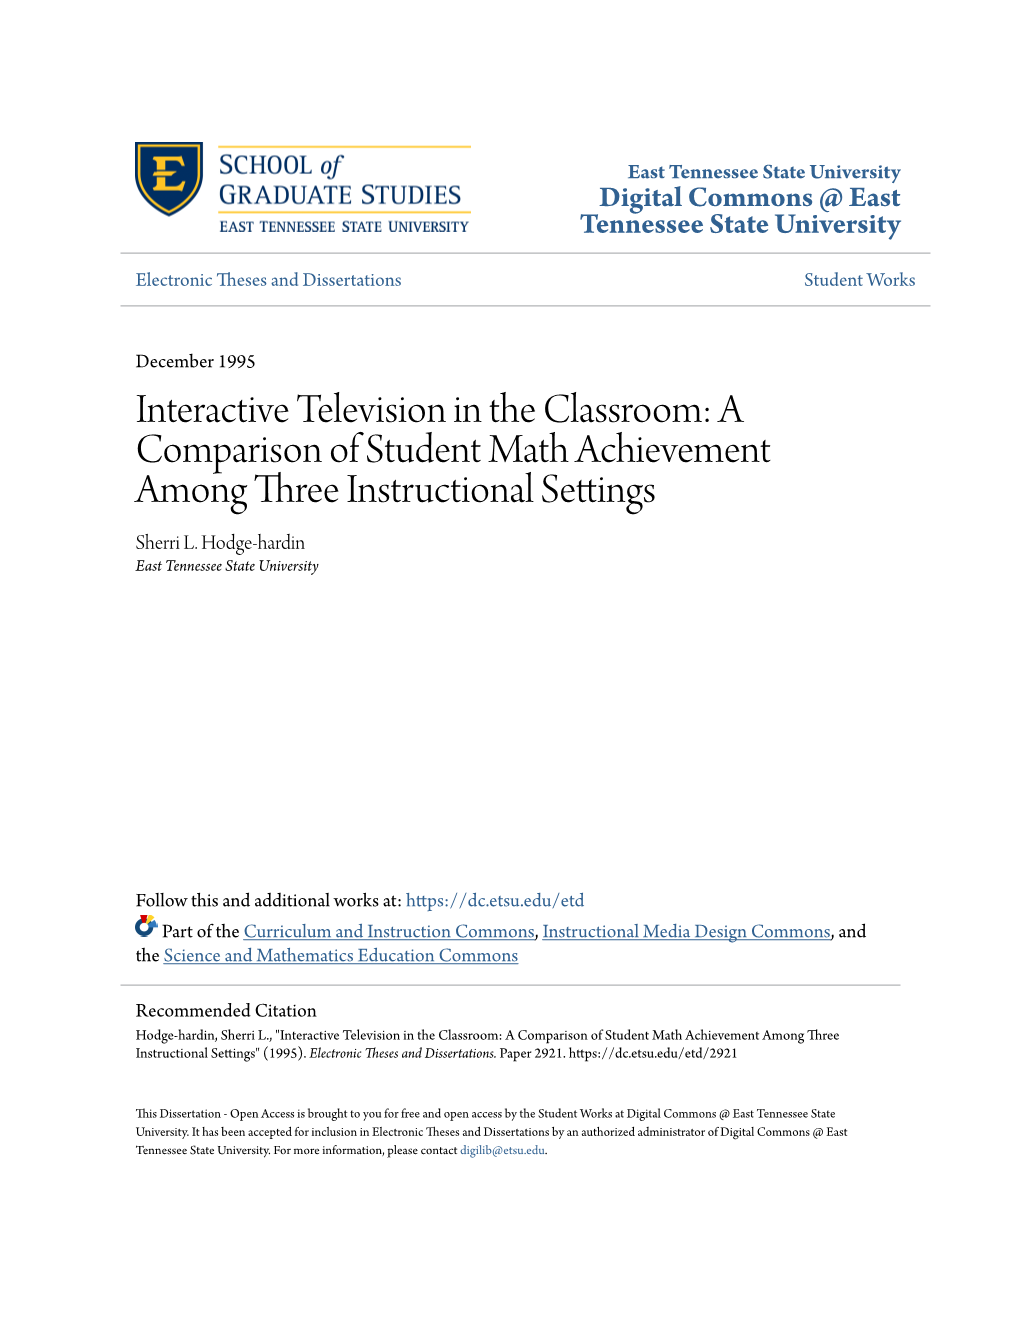 Interactive Television in the Classroom: a Comparison of Student Math Achievement Among Three Instructional Settings Sherri L